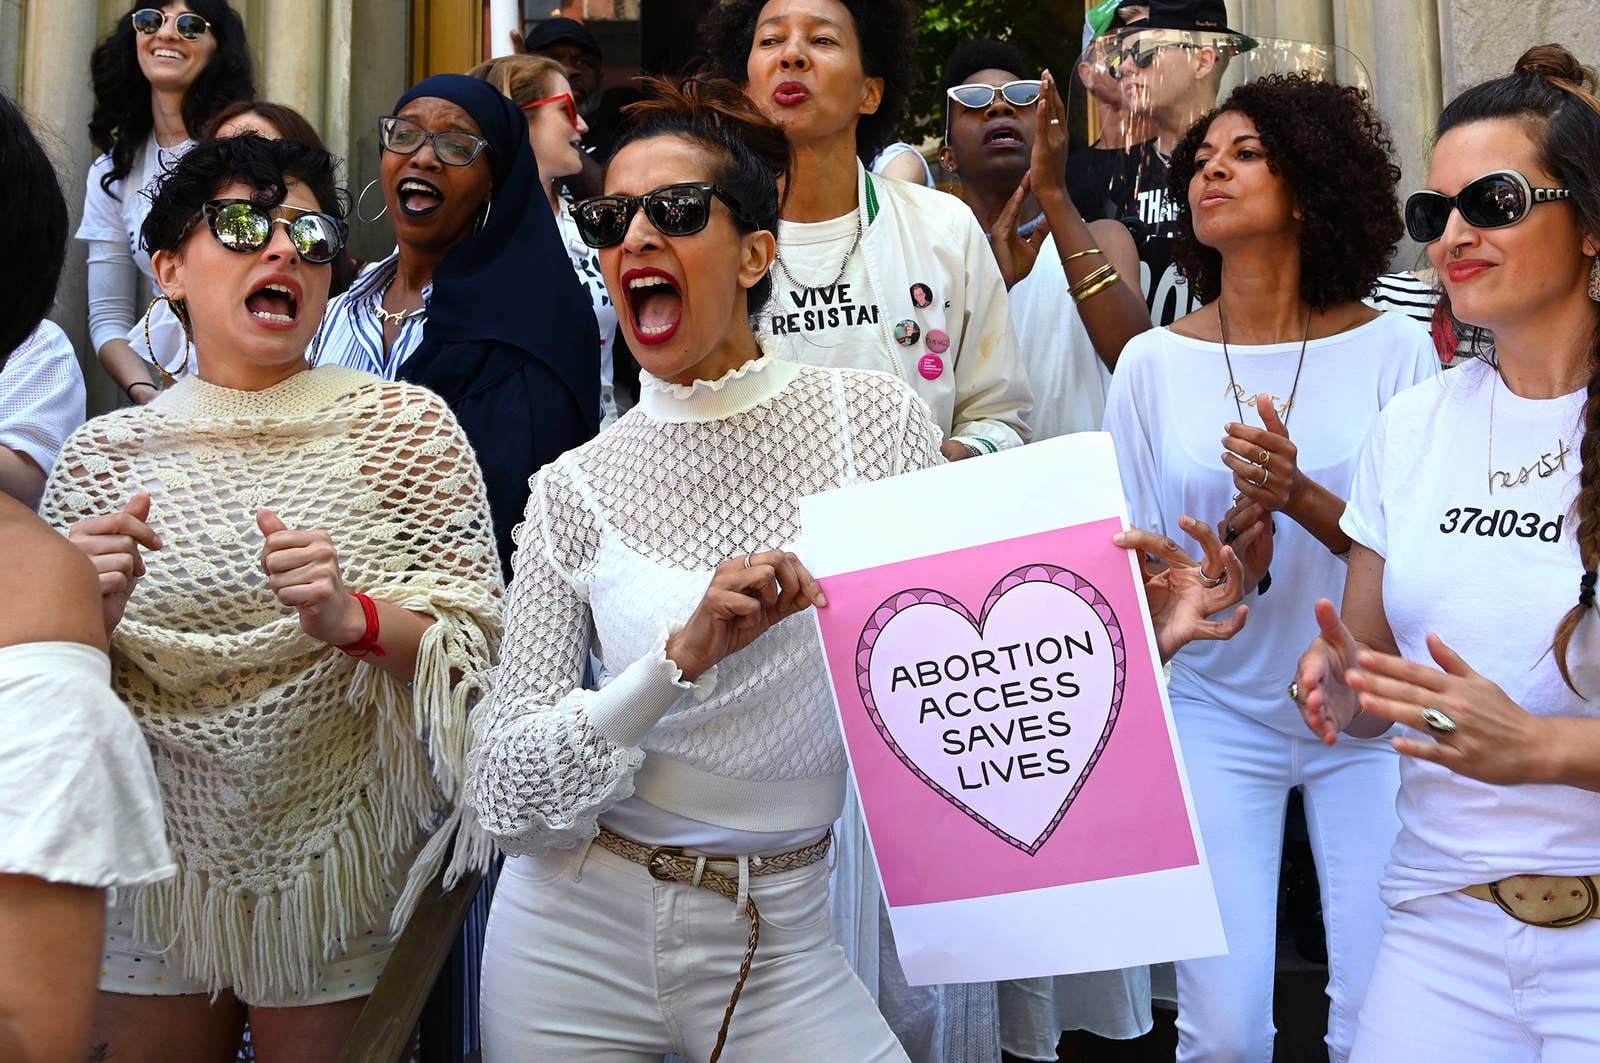 Women from the Resistance Revival Chorus take part in a rally in front of the Middle Collegiate Church in the East Village of New York City.